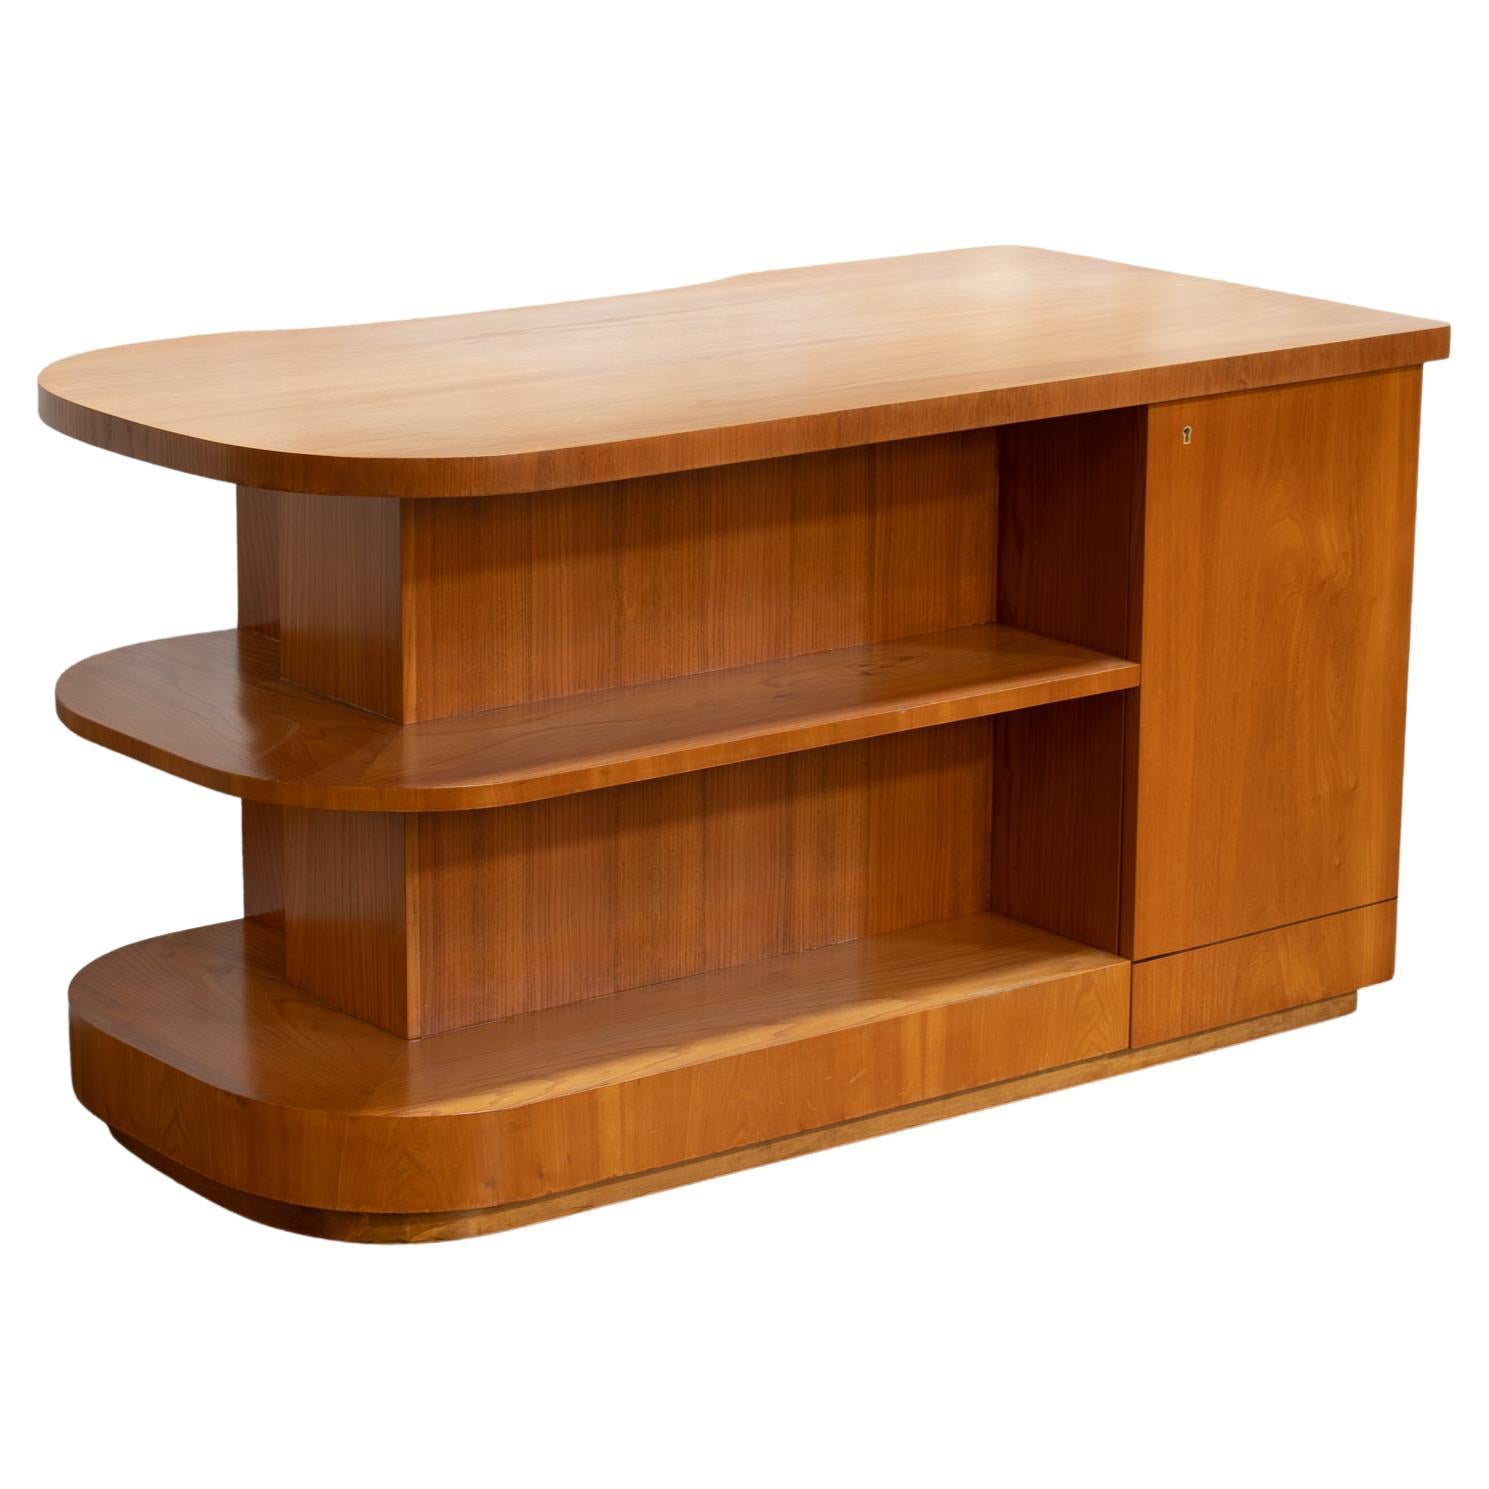 Art Moderne Swedish Elm Desk with open shelf, two cabinets, and a set of three drawer. This is a unique piece, with a curved organic shape and plenty of storage solutions. Display books and treasures on the exposed shelves and tuck files, papers,